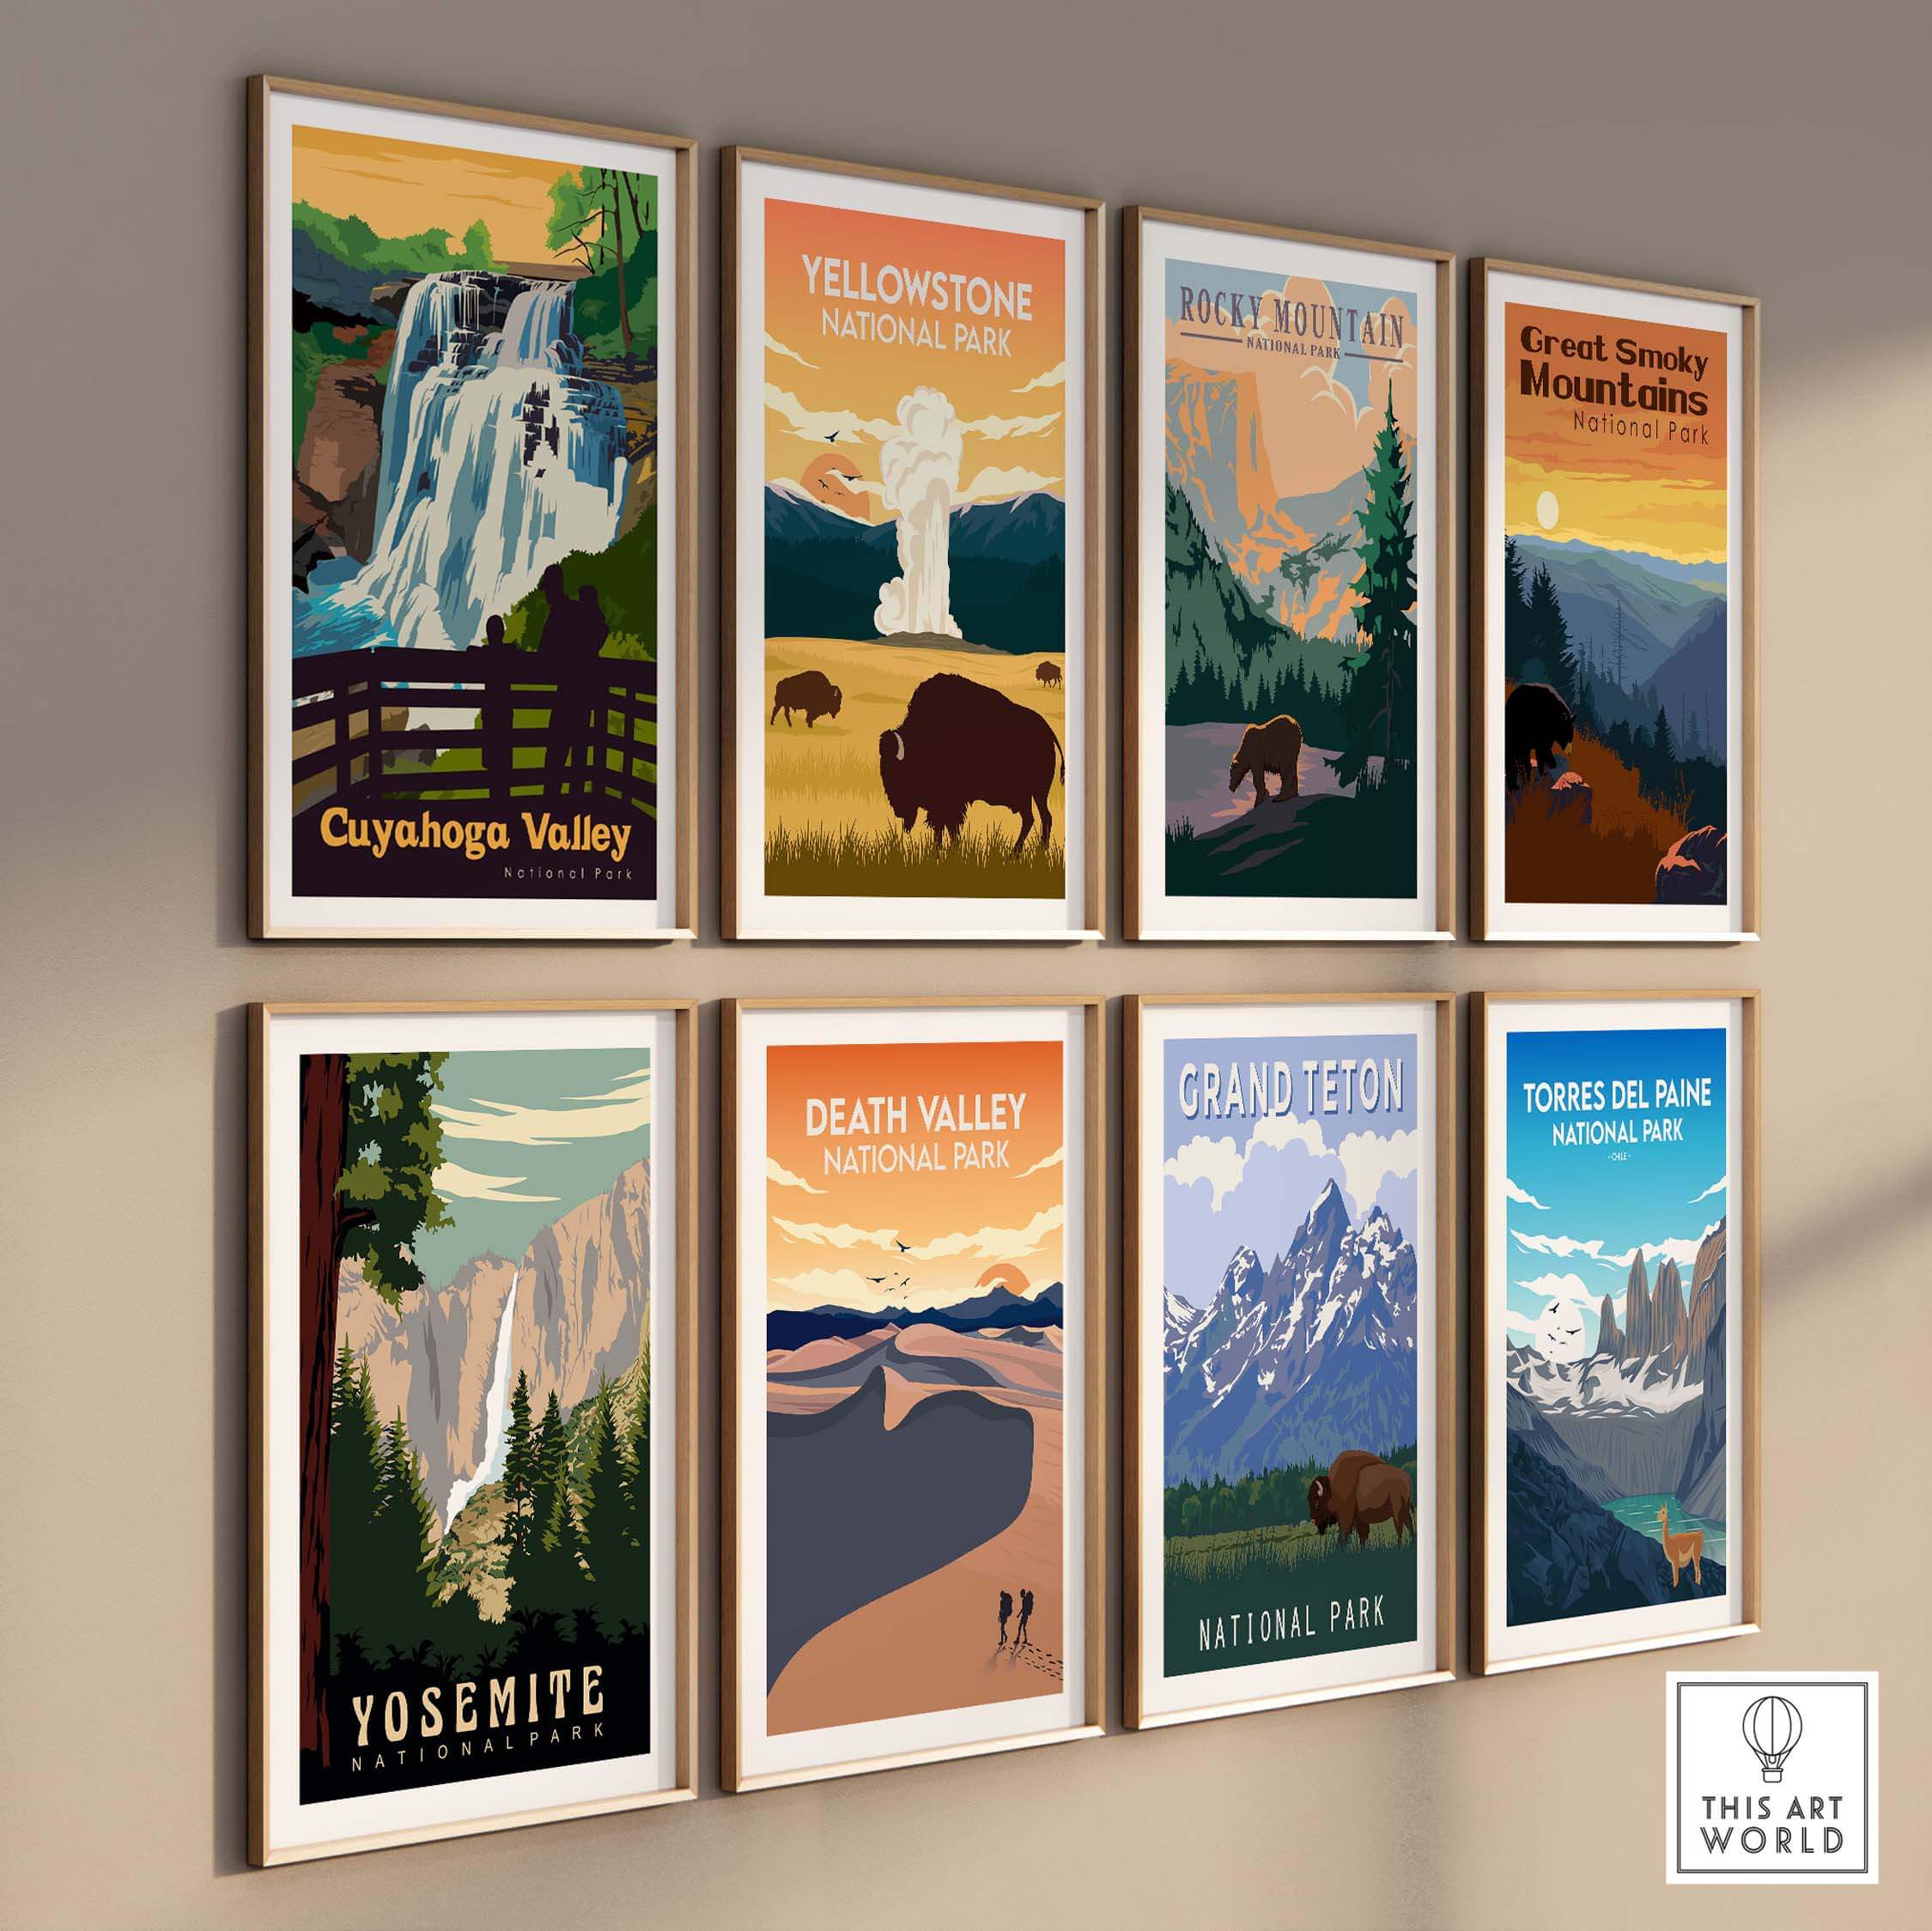 cuyahoga valley national park poster